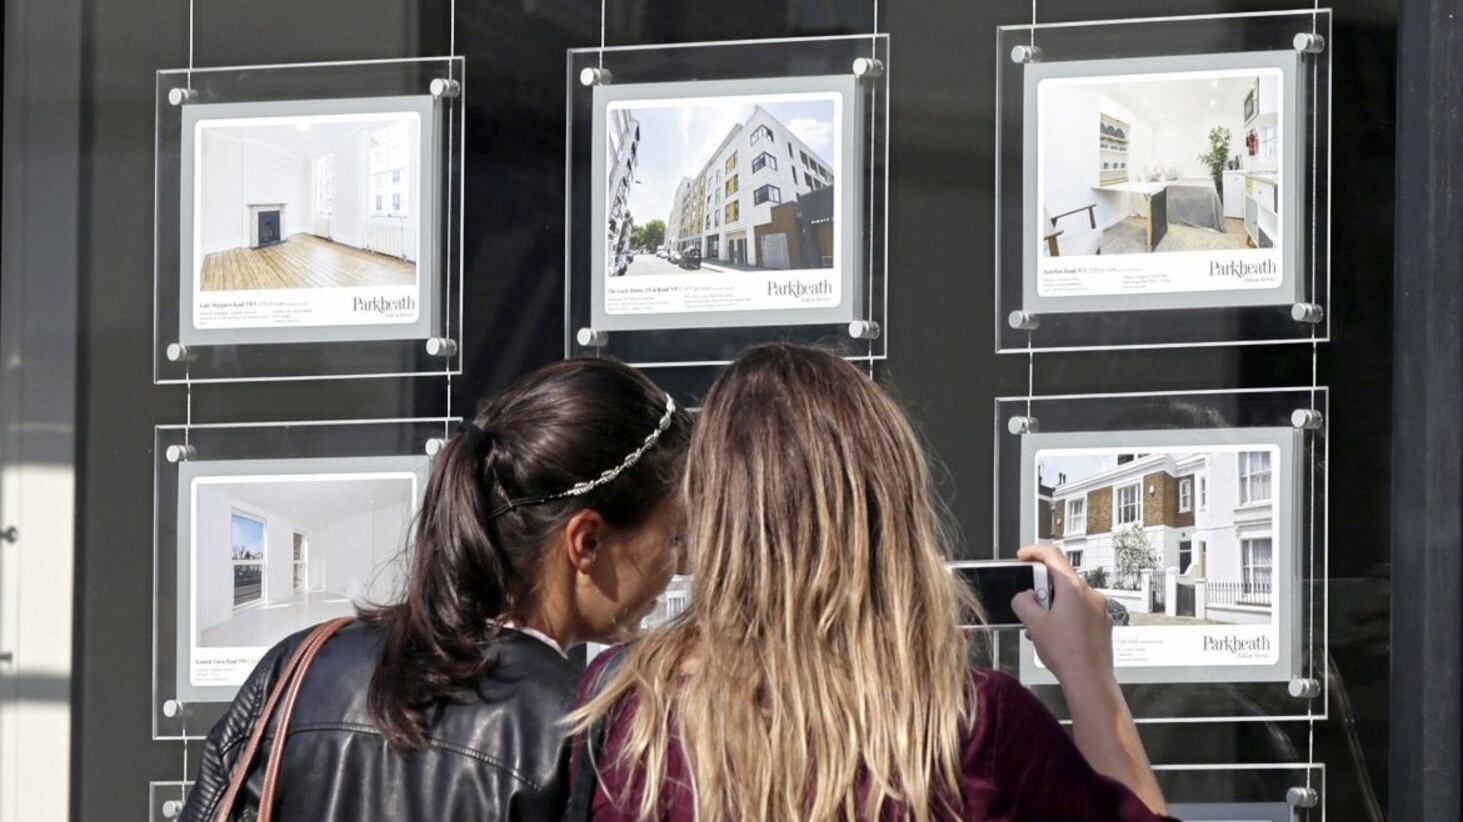 House price growth in the UK slowed to the weakest rate seen in nearly four years in February 